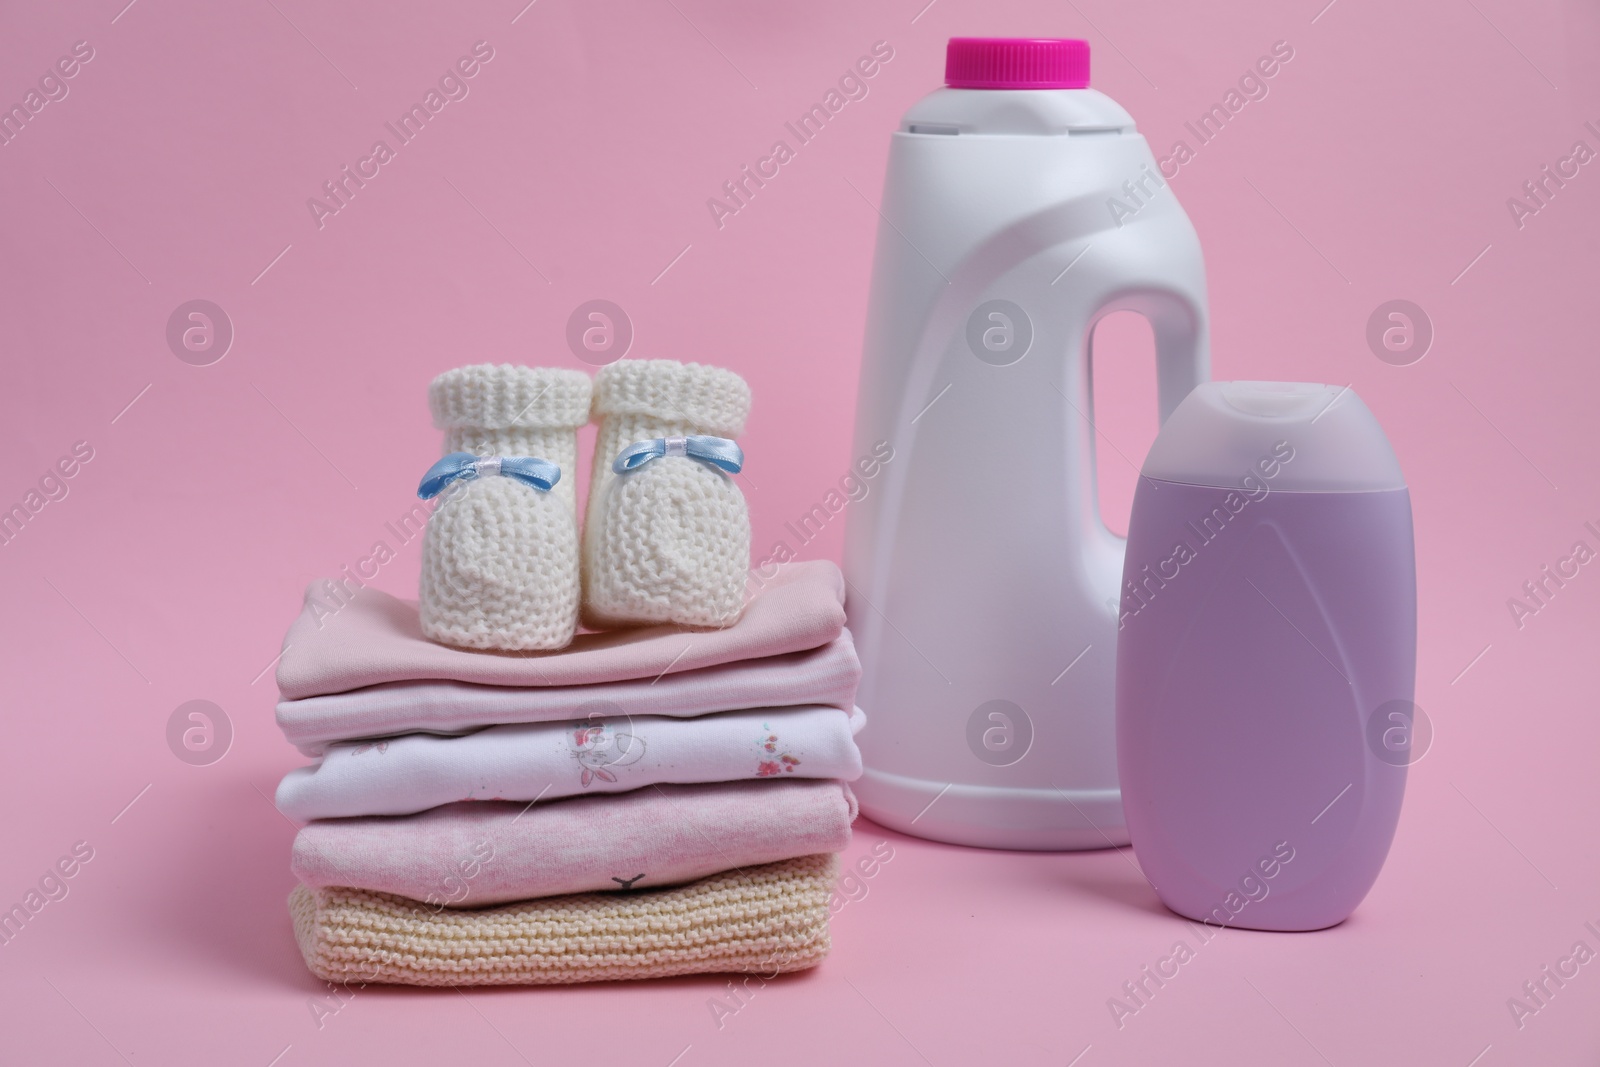 Photo of Laundry detergents, stack of baby clothes and small booties on pink background